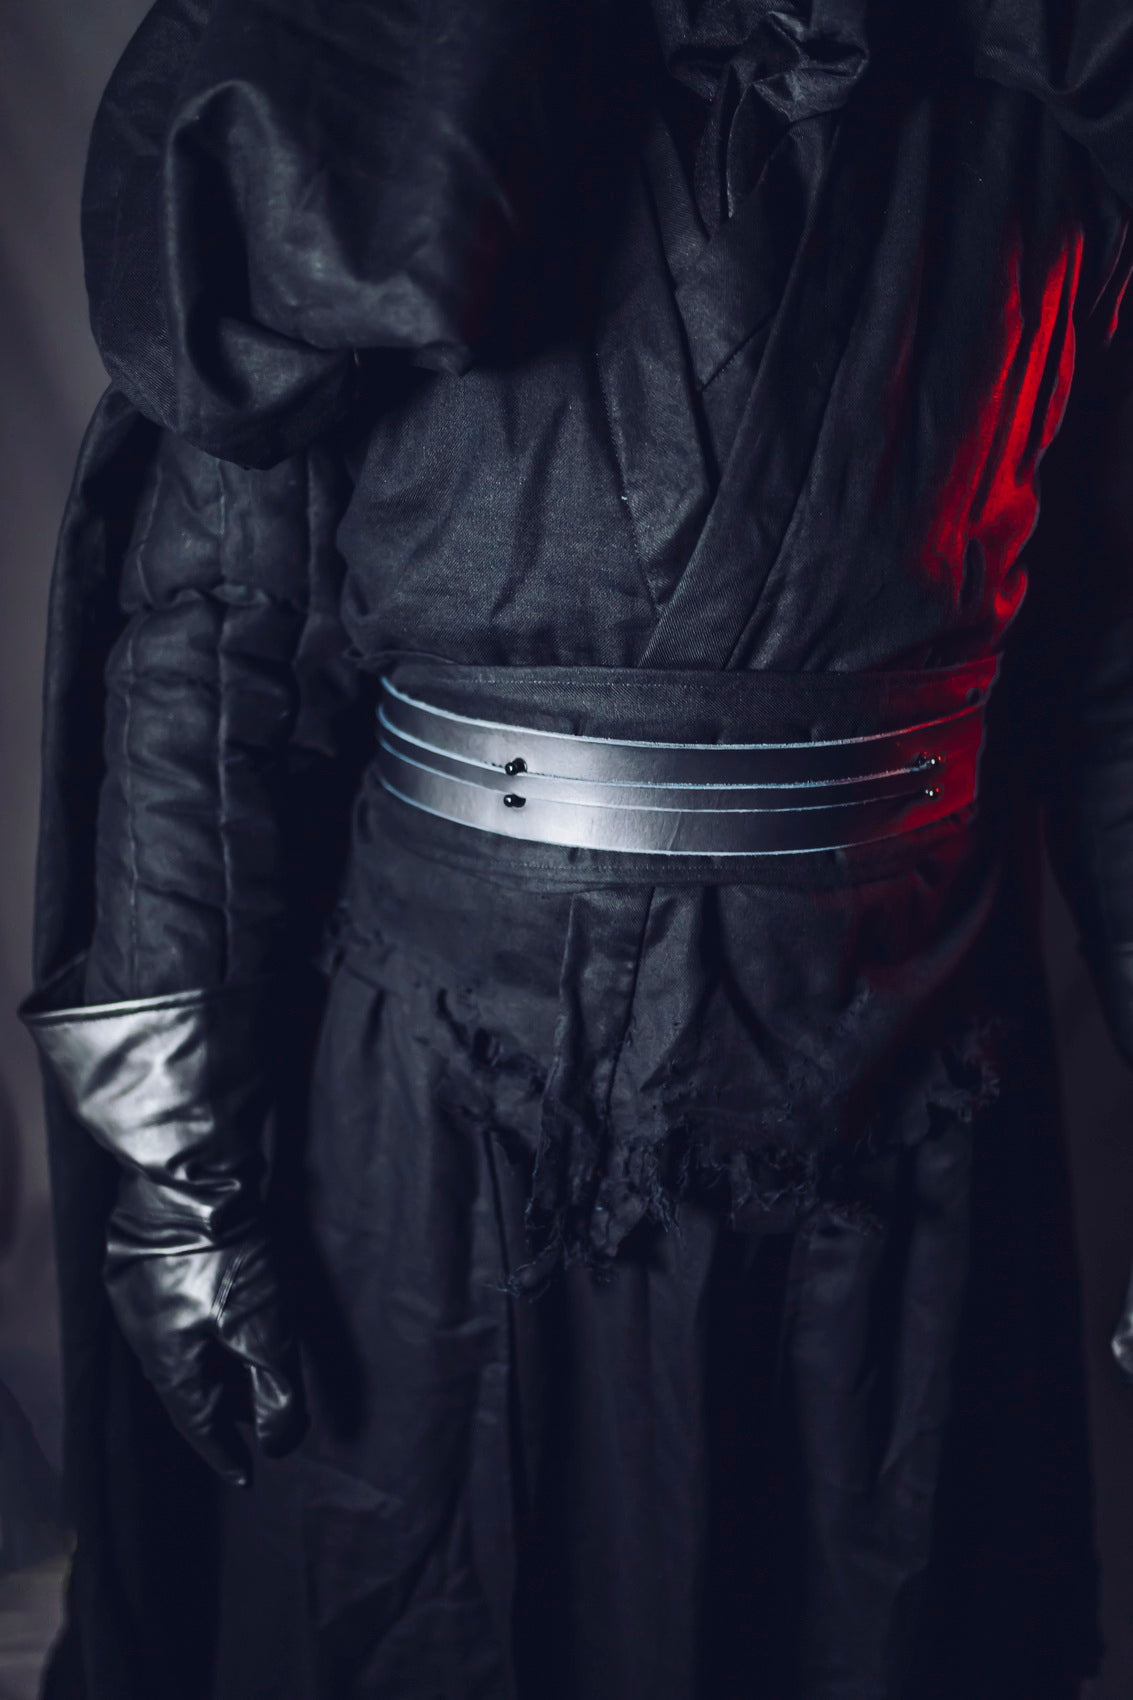 Darth Nihilus Leather Belt, Star Wars Cosplay, Champions of the force